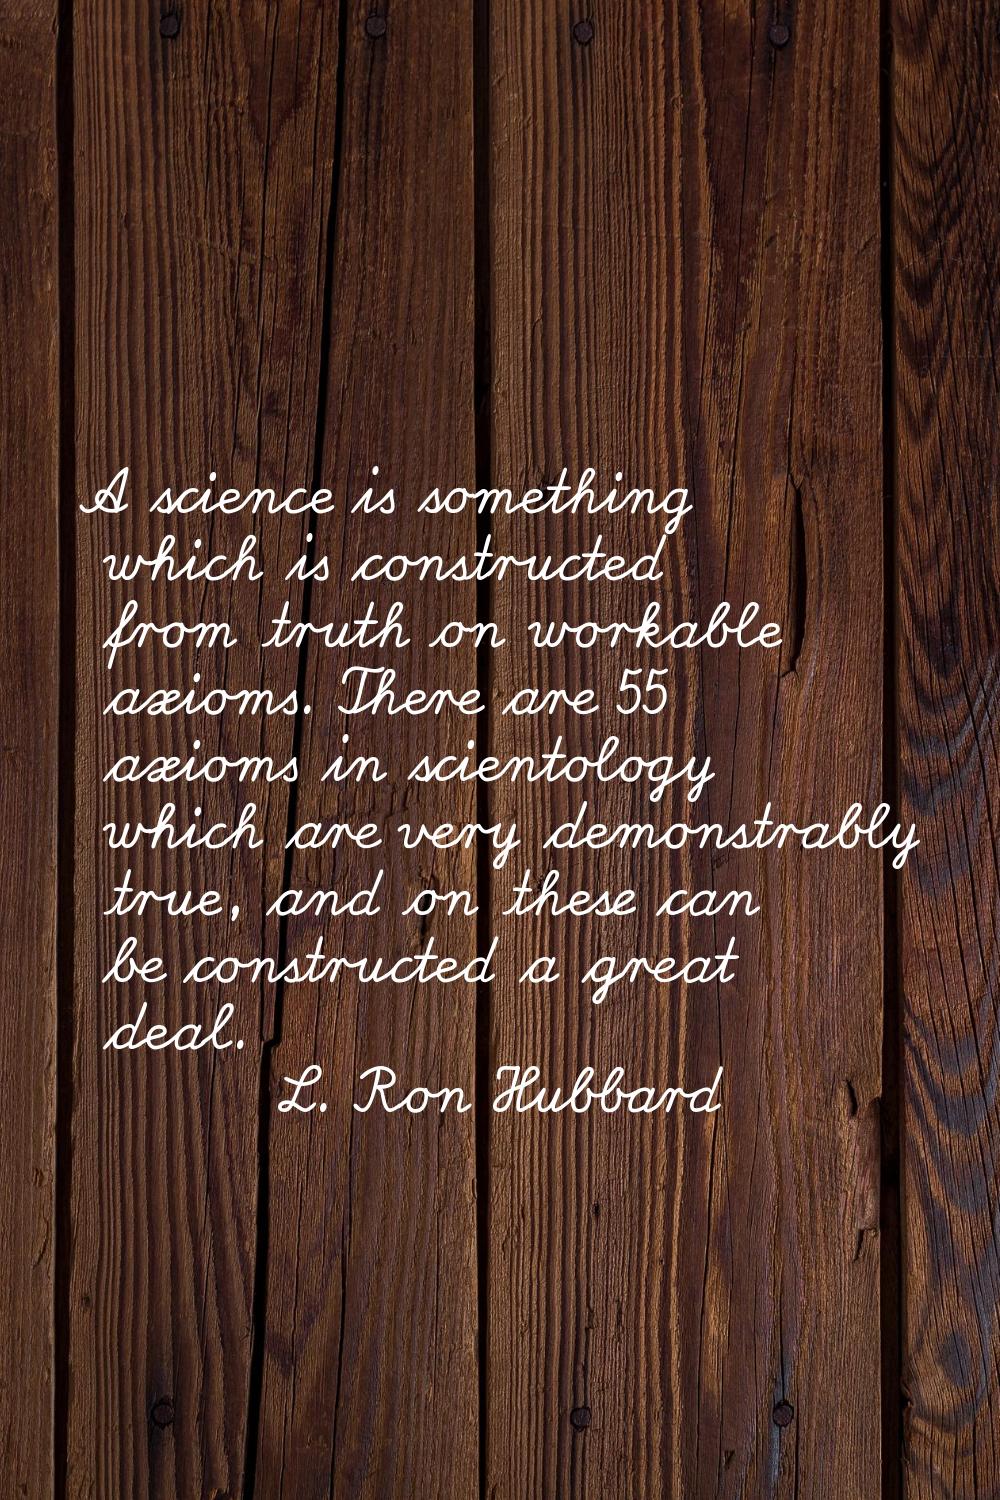 A science is something which is constructed from truth on workable axioms. There are 55 axioms in s